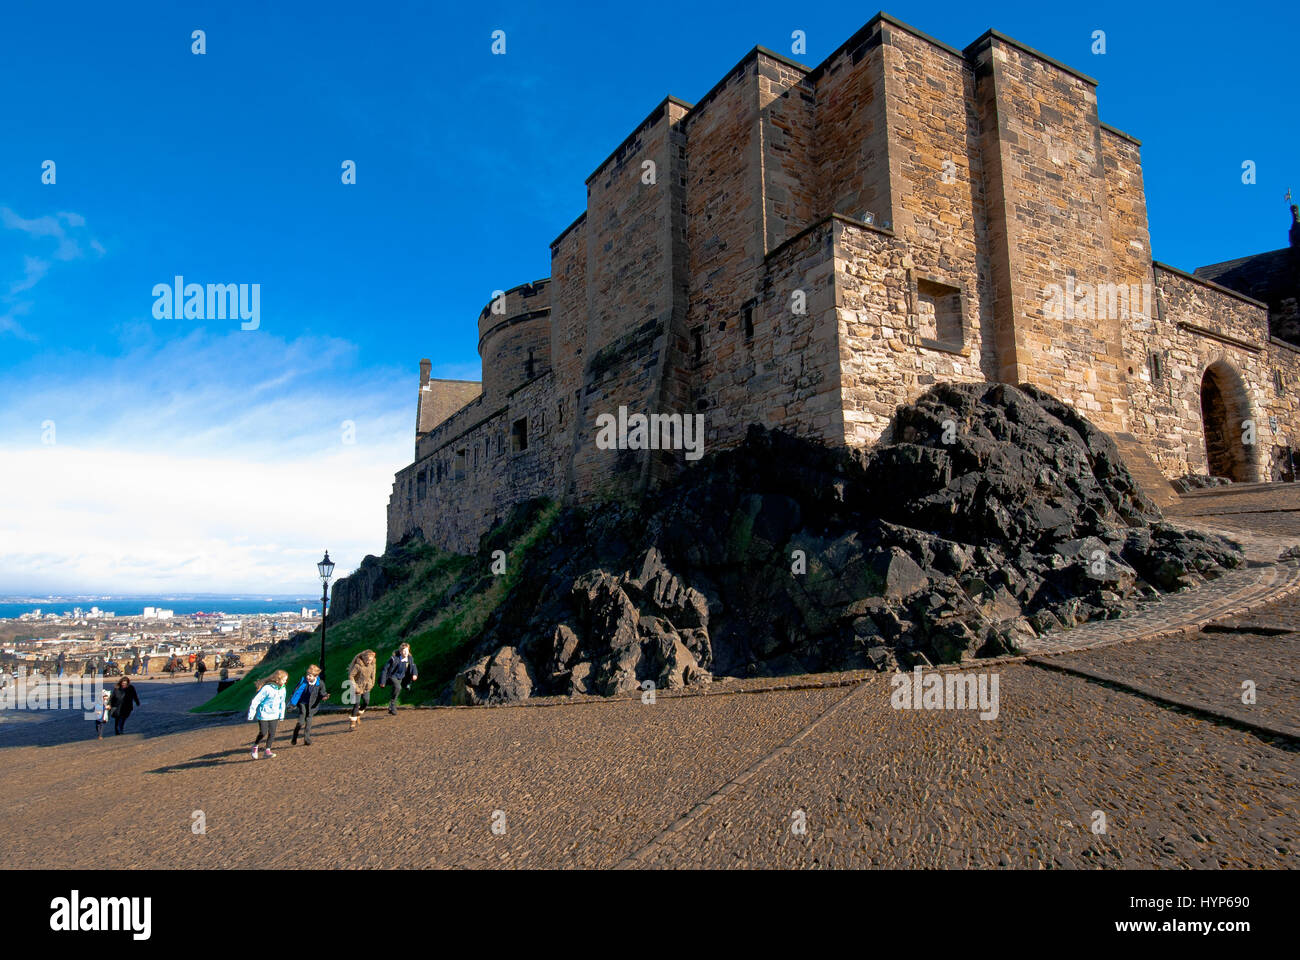 View of Edinburgh and the castle. Stock Photo